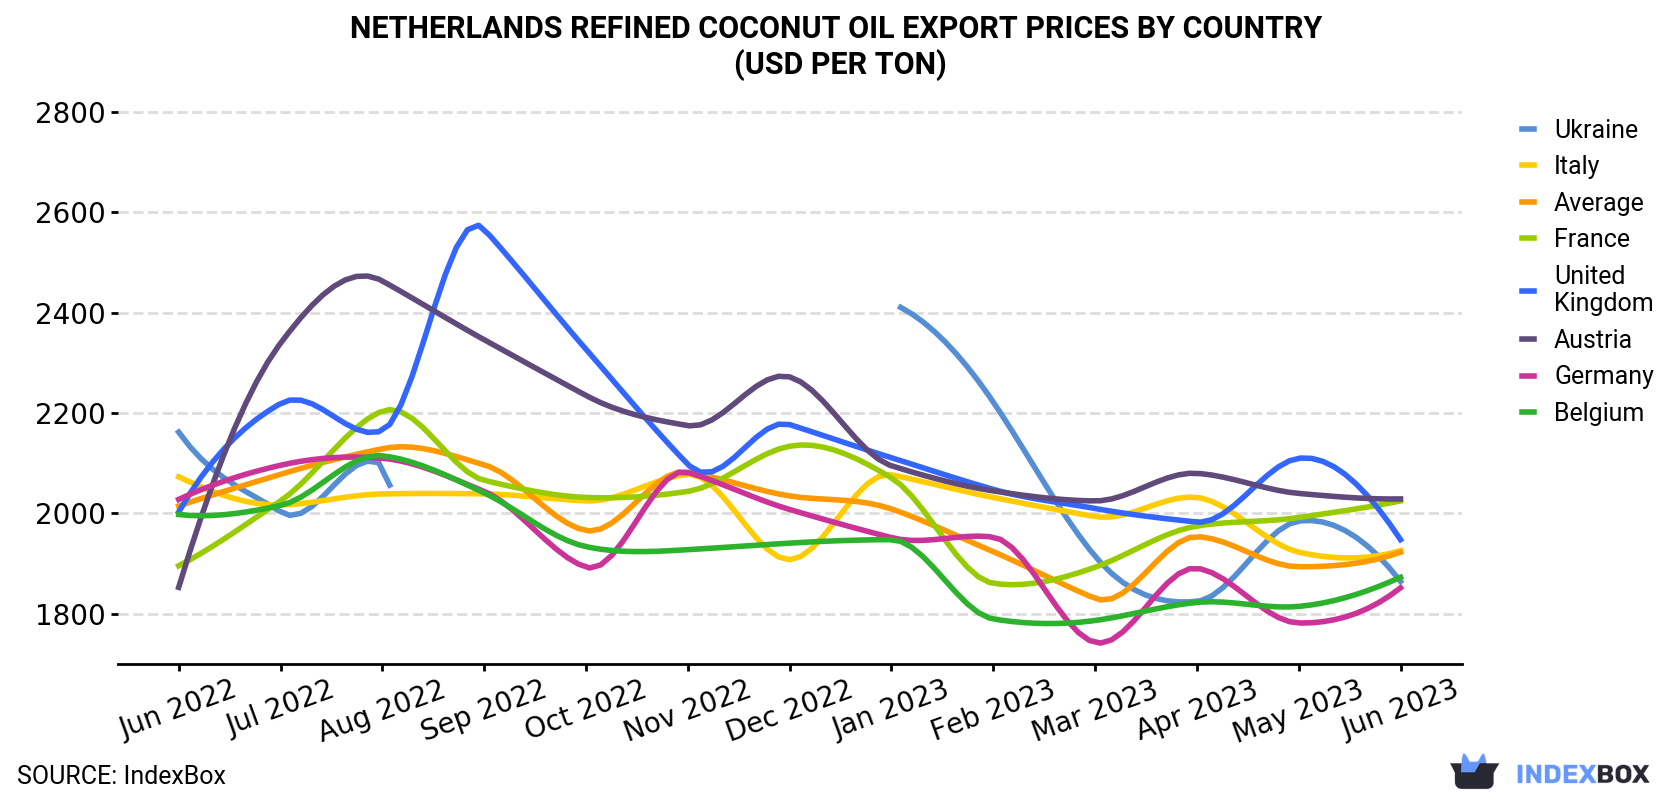 Netherlands Refined Coconut Oil Export Prices By Country (USD Per Ton)